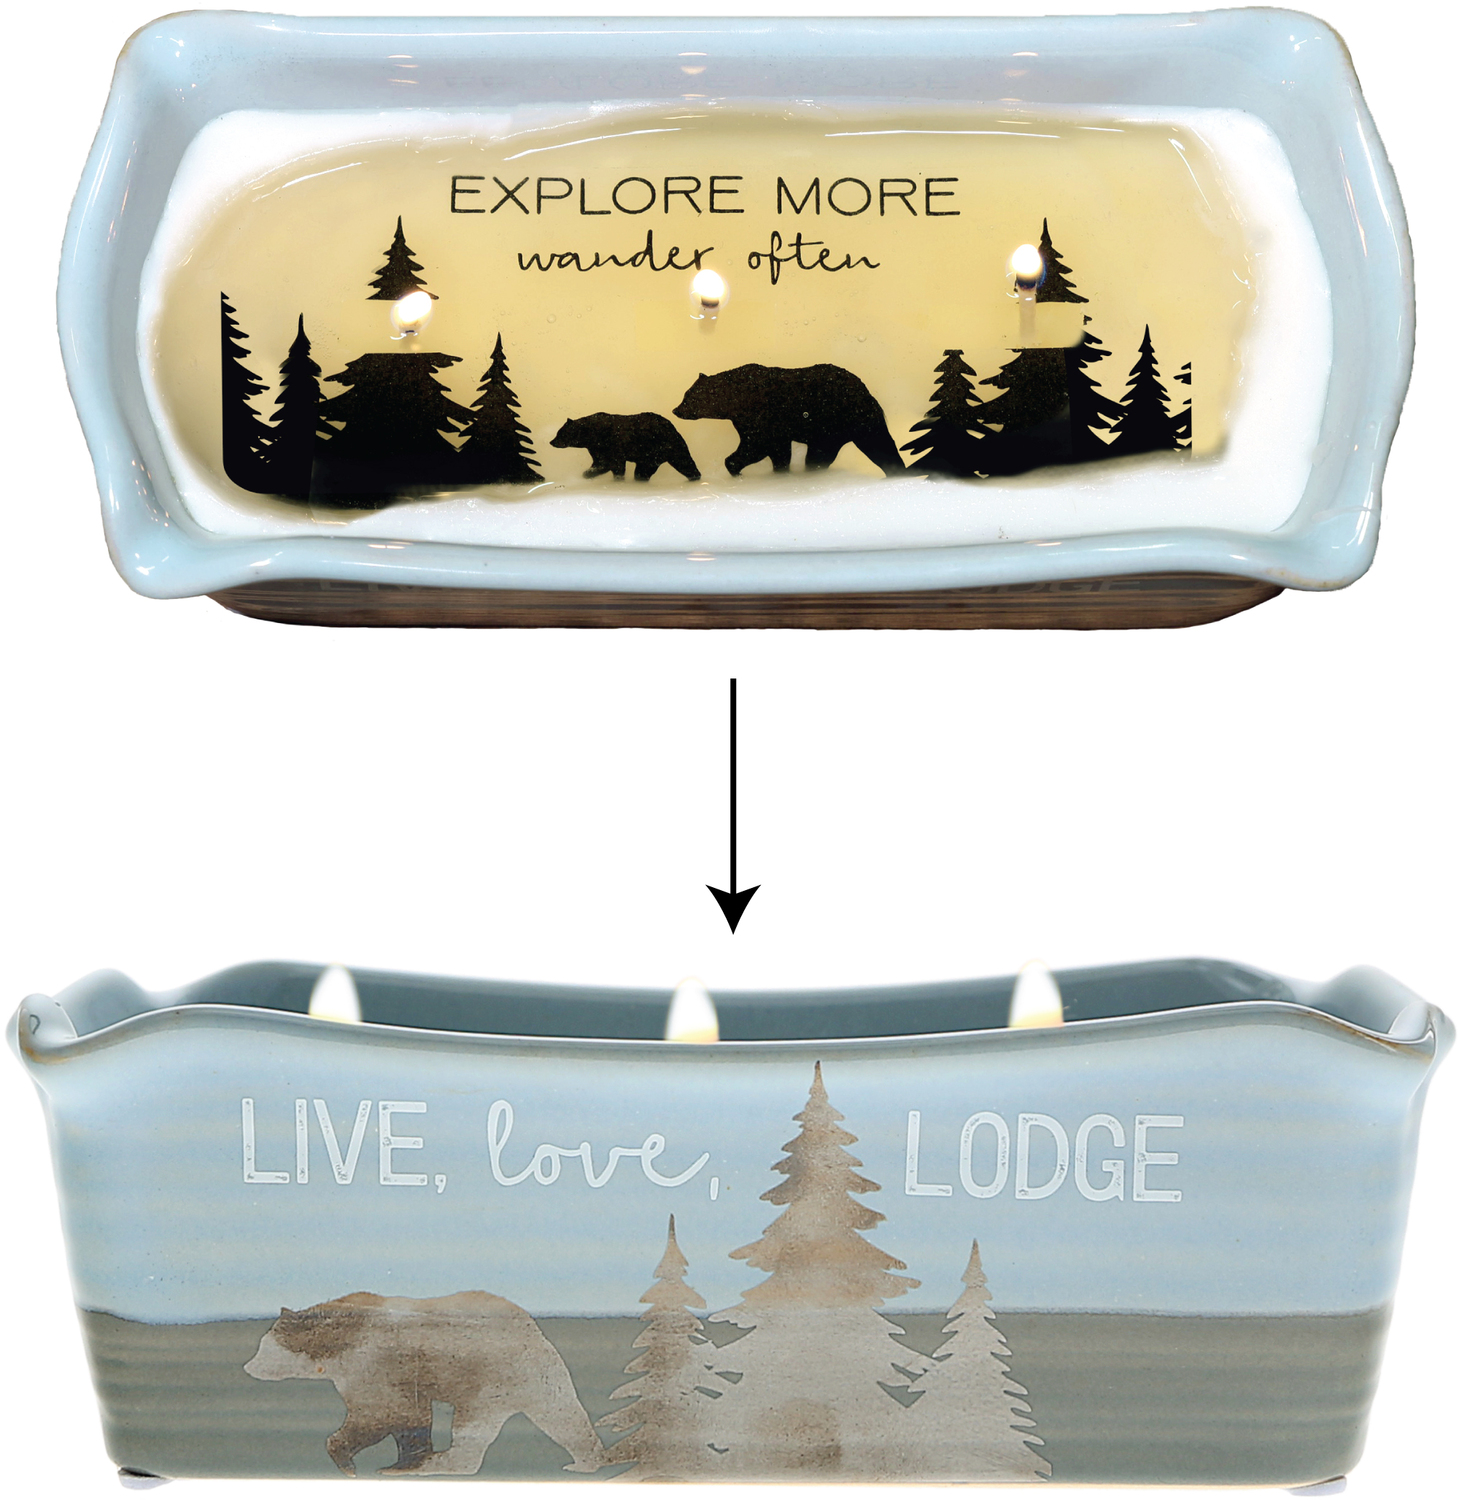 Live Love Lodge by Wild Woods Lodge - Live Love Lodge - 12 oz - 100% Soy Wax Reveal, Triple Wick Candle
Scent: Tranquility